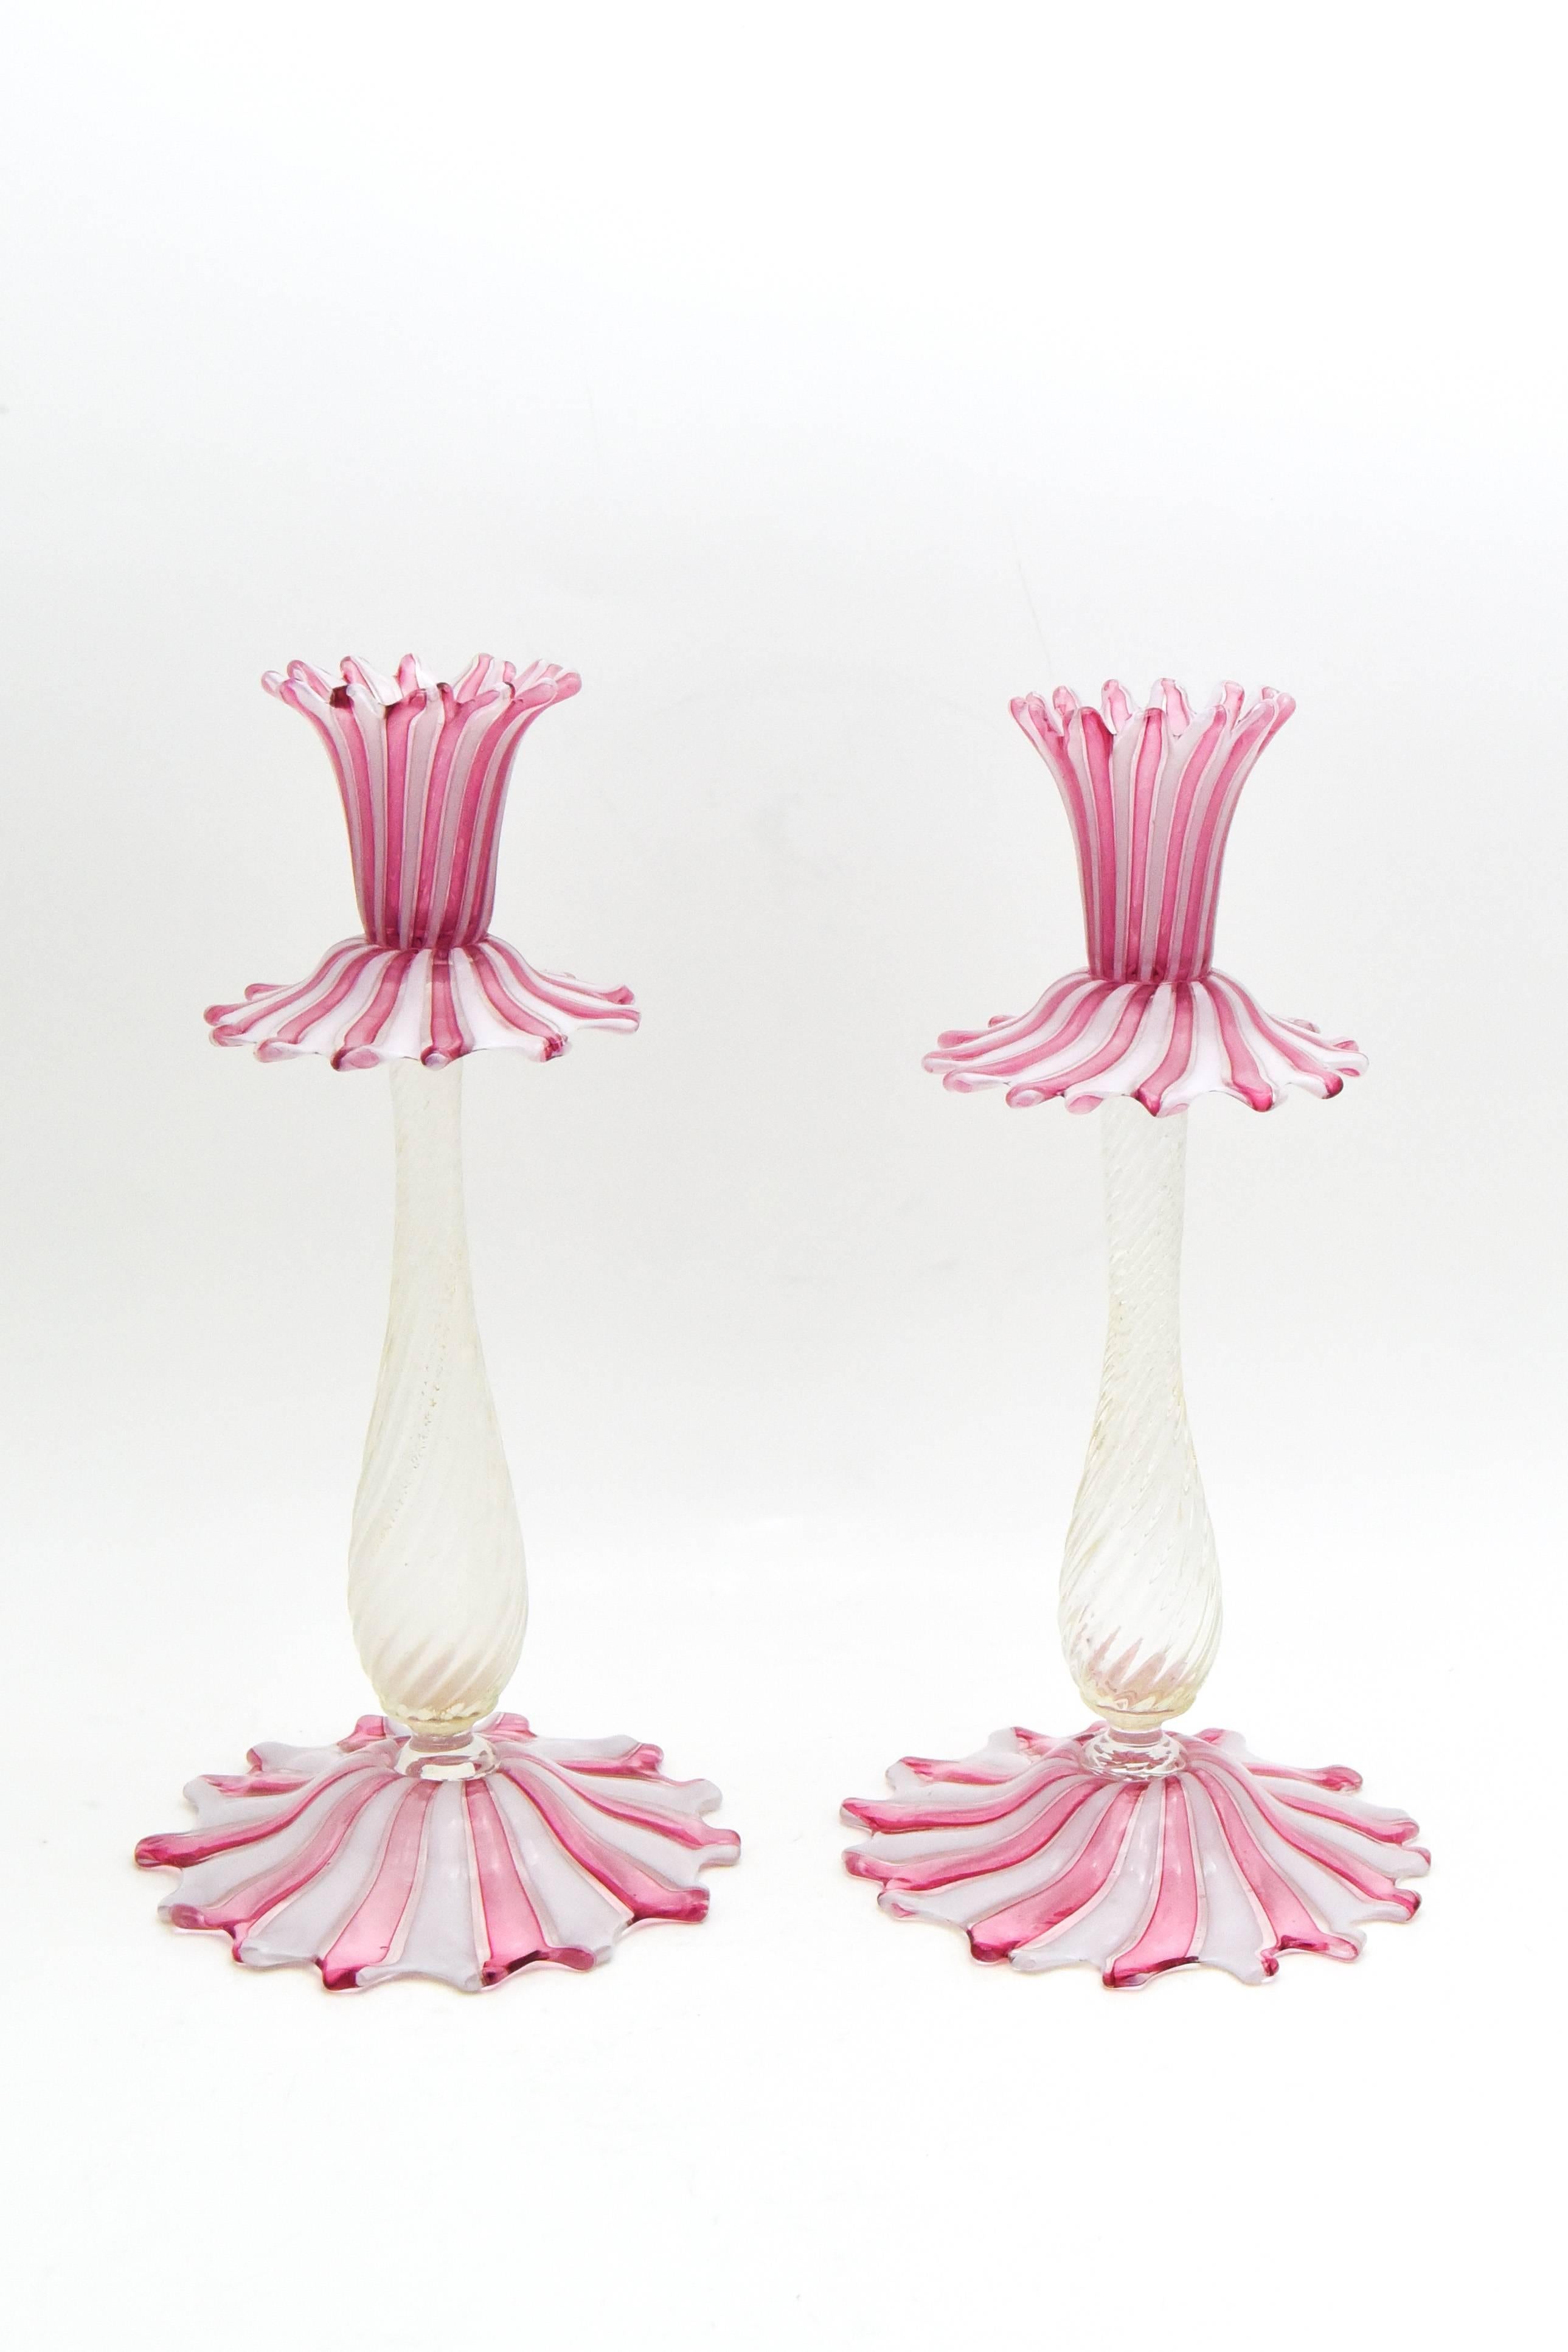 Handblown Venetian Murano Three-Piece Centerpiece Pink and White Stripes In Excellent Condition For Sale In Great Barrington, MA